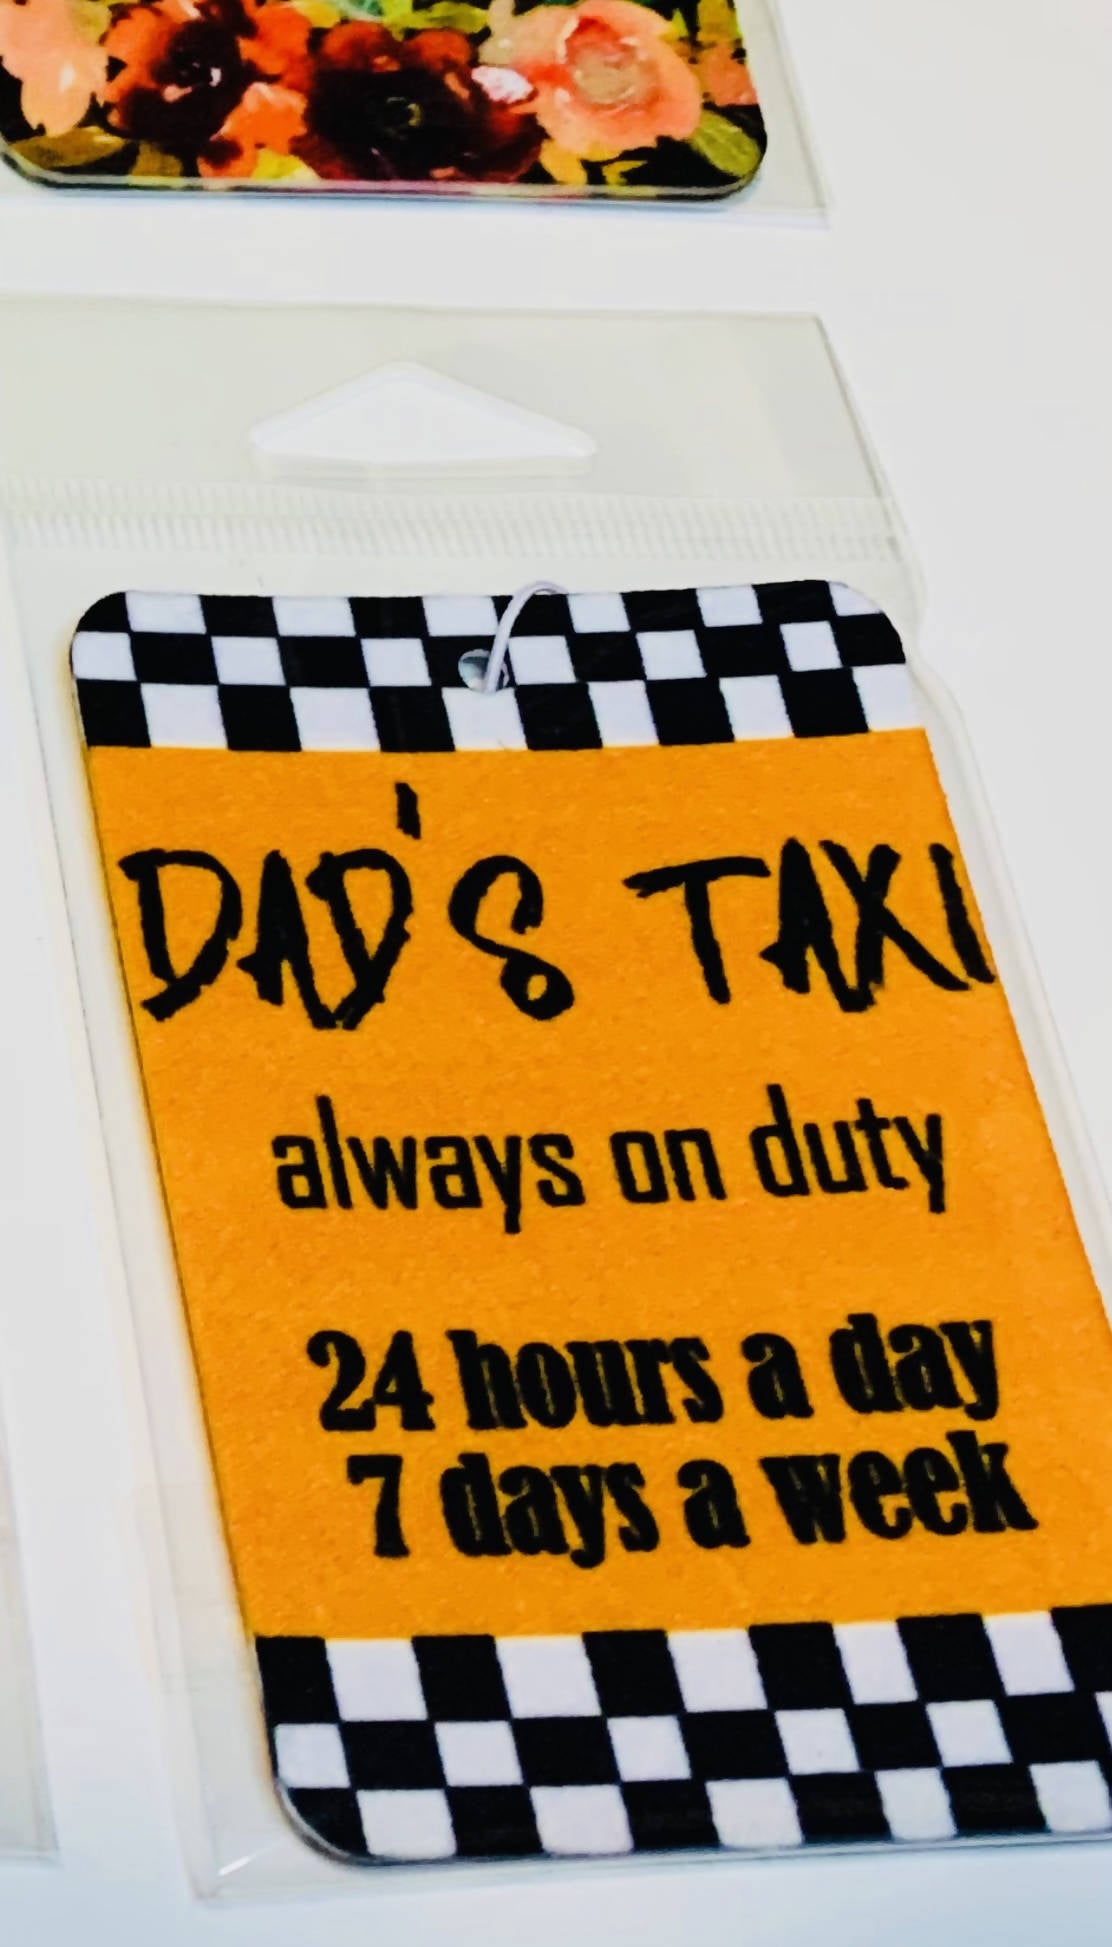 Dad’s Taxi Air Freshener